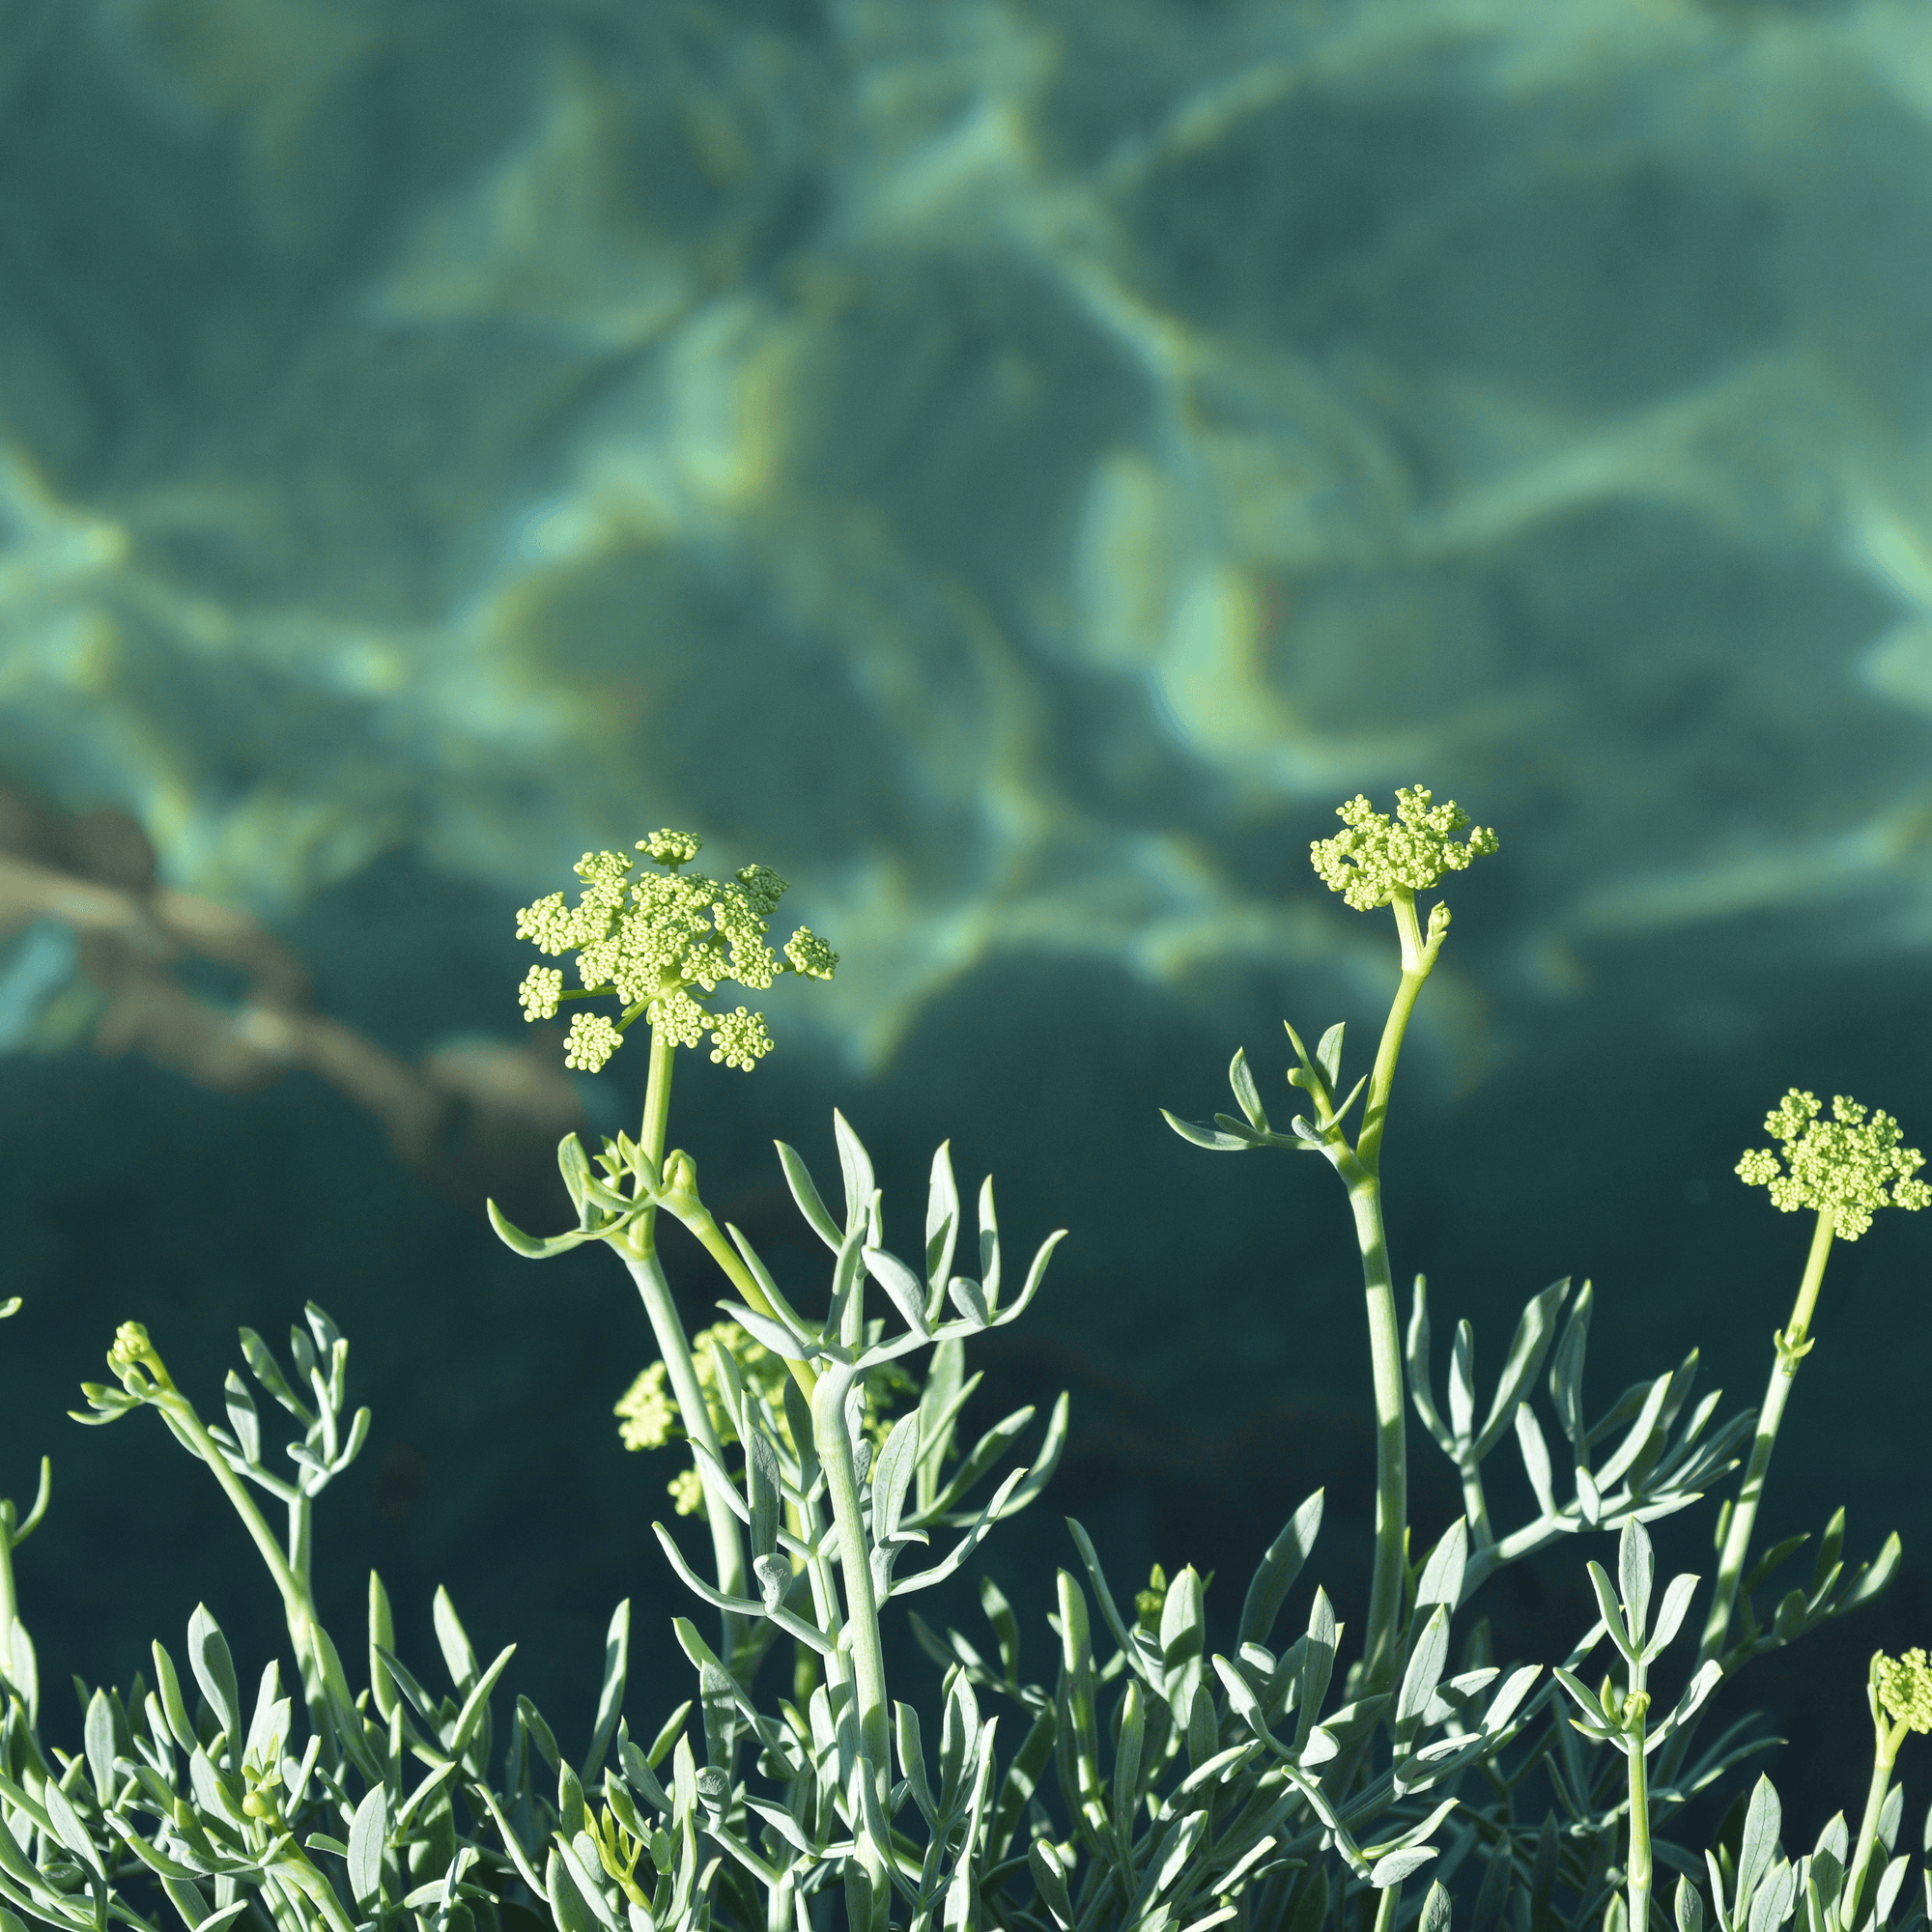 Be Bohemian Botanical Sea Serum Sea Fennel. Sea Fennel growing underwater, shot from an angle pointing up towards what looks like a bright sun trying to shine its rays into the water's depths.